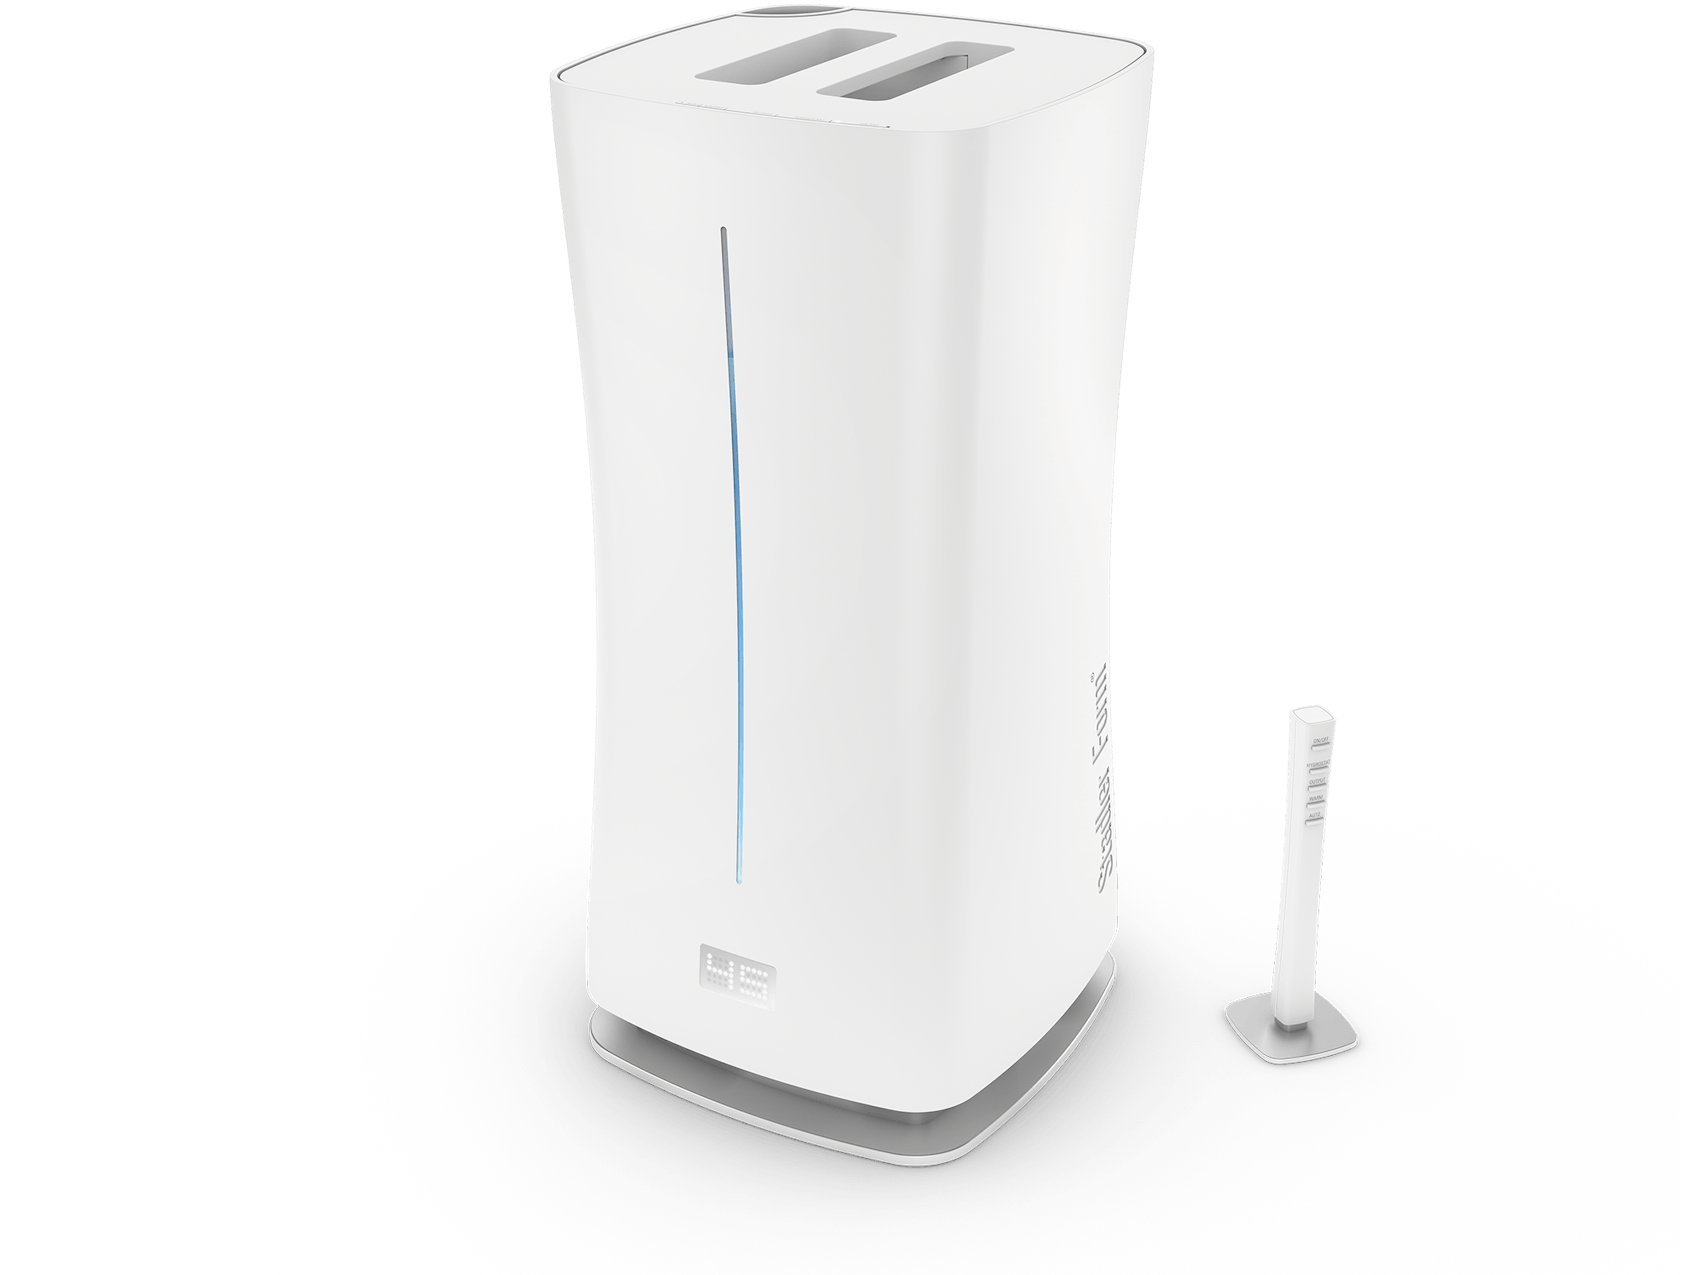 Eva humidifier by Stadler Form in white as perspective view including remote controll